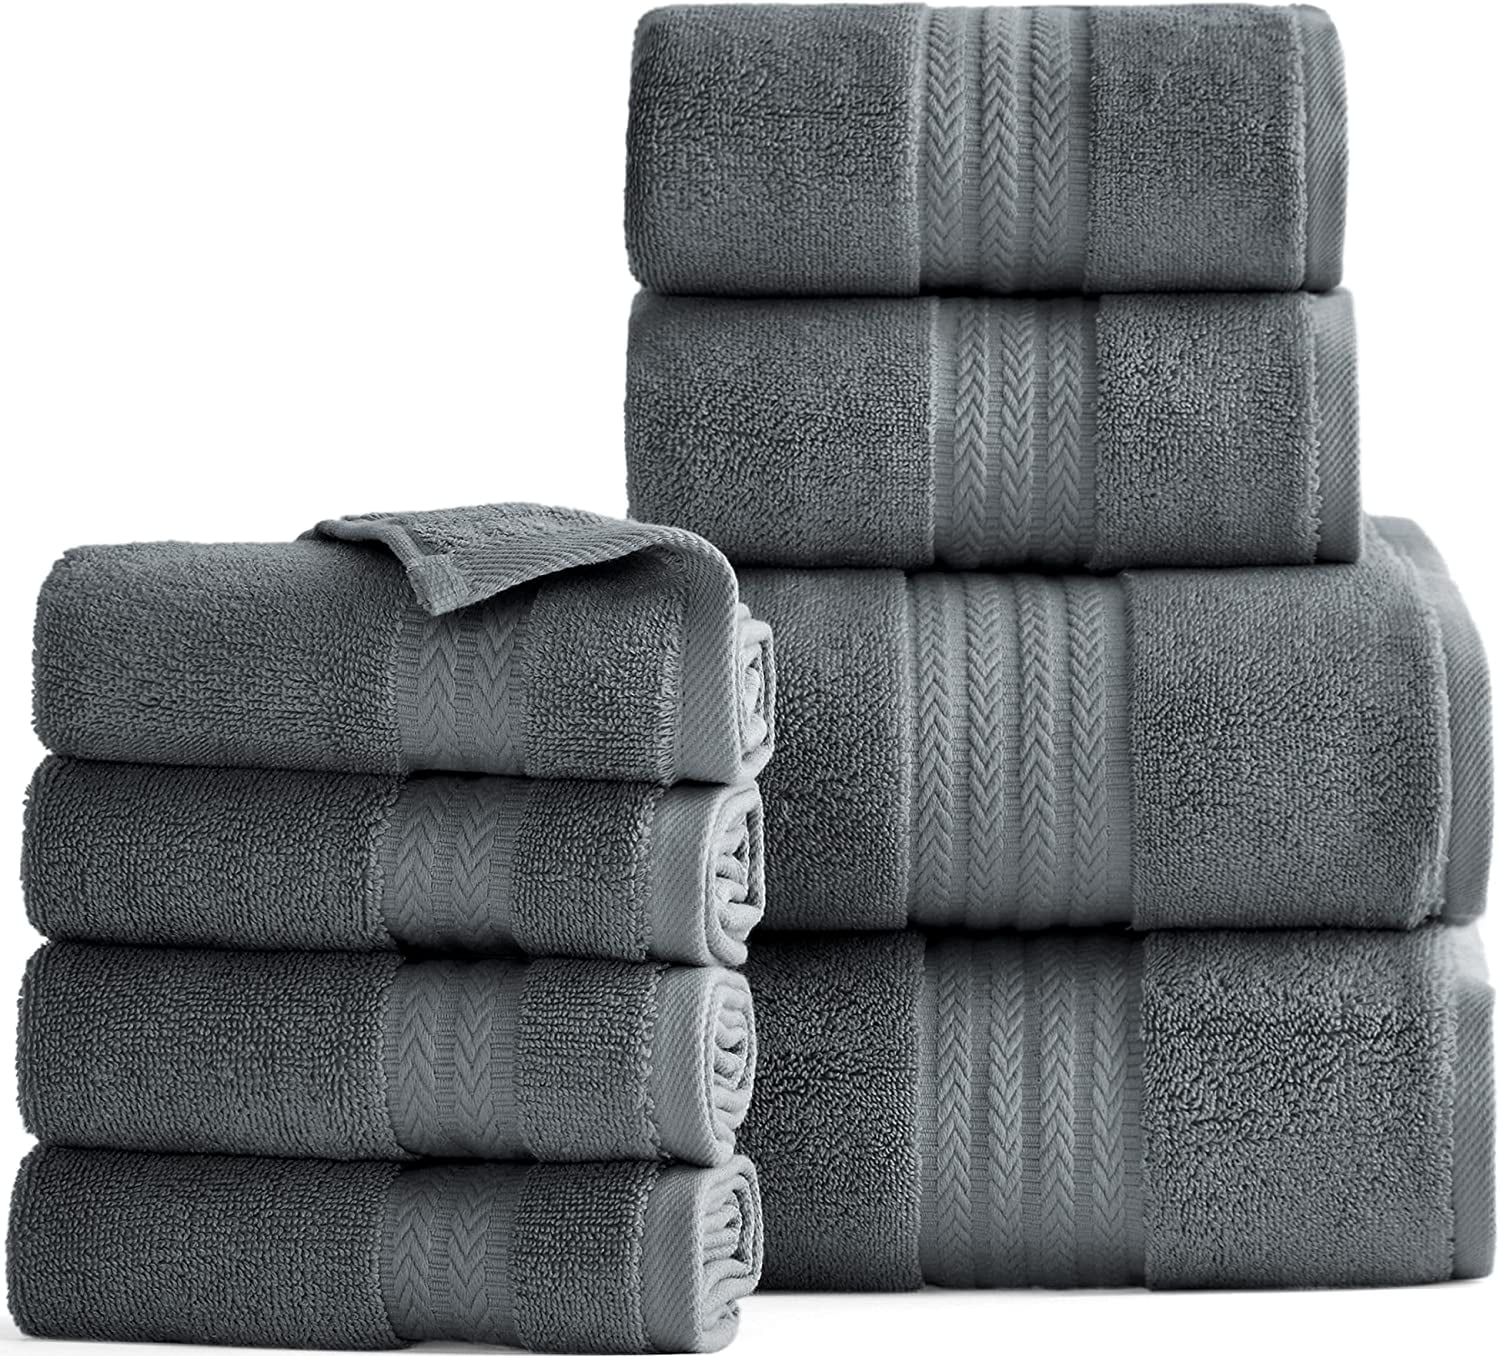 Bath Towel & Sheet Soft Touch Towels 100% pure Egyptian cotton 500 GSM Hand 